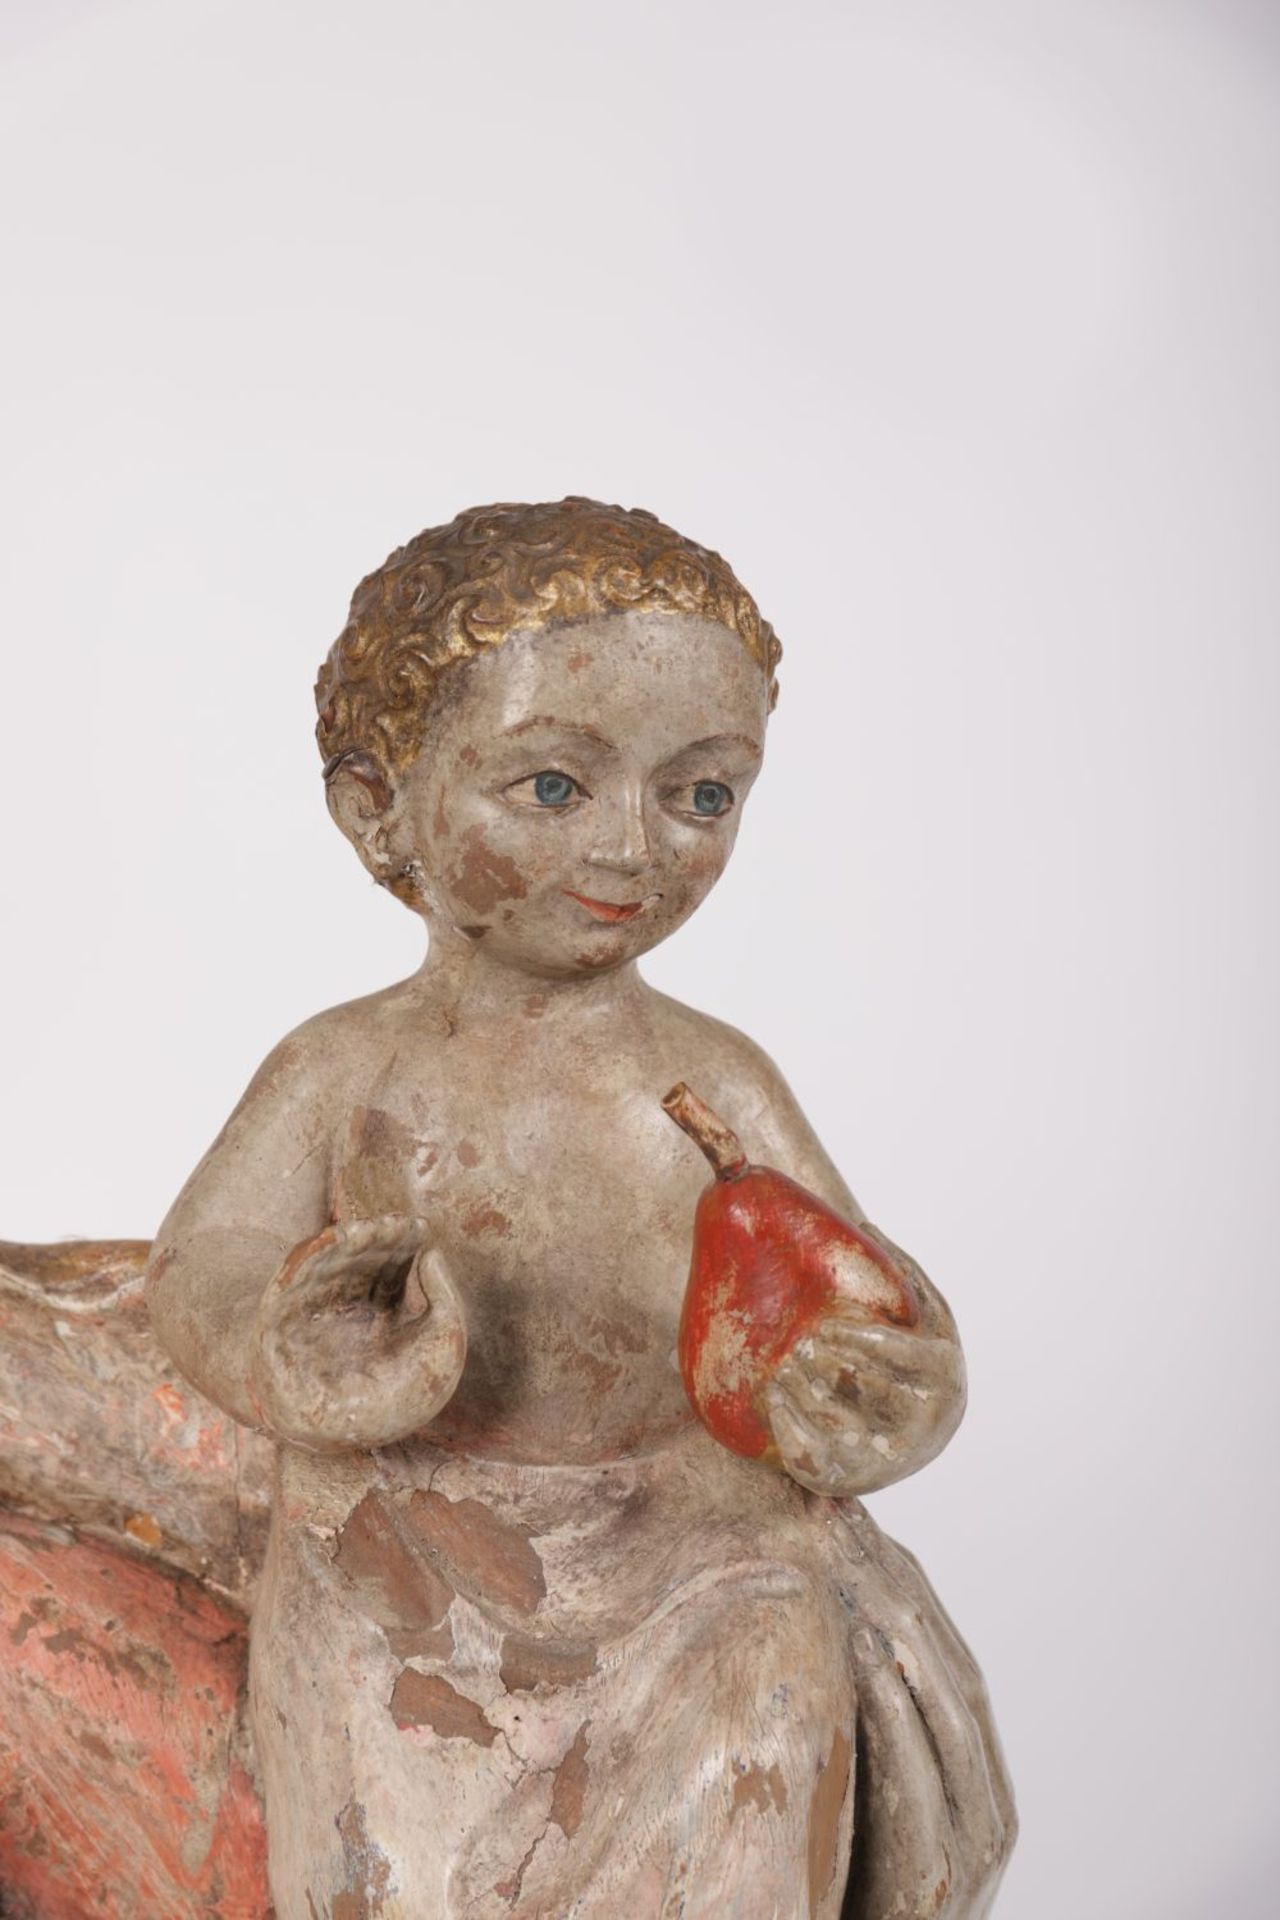 LARGE 18/19TH-CENTURY GERMAN POLYCHROME STATUE - Image 3 of 4